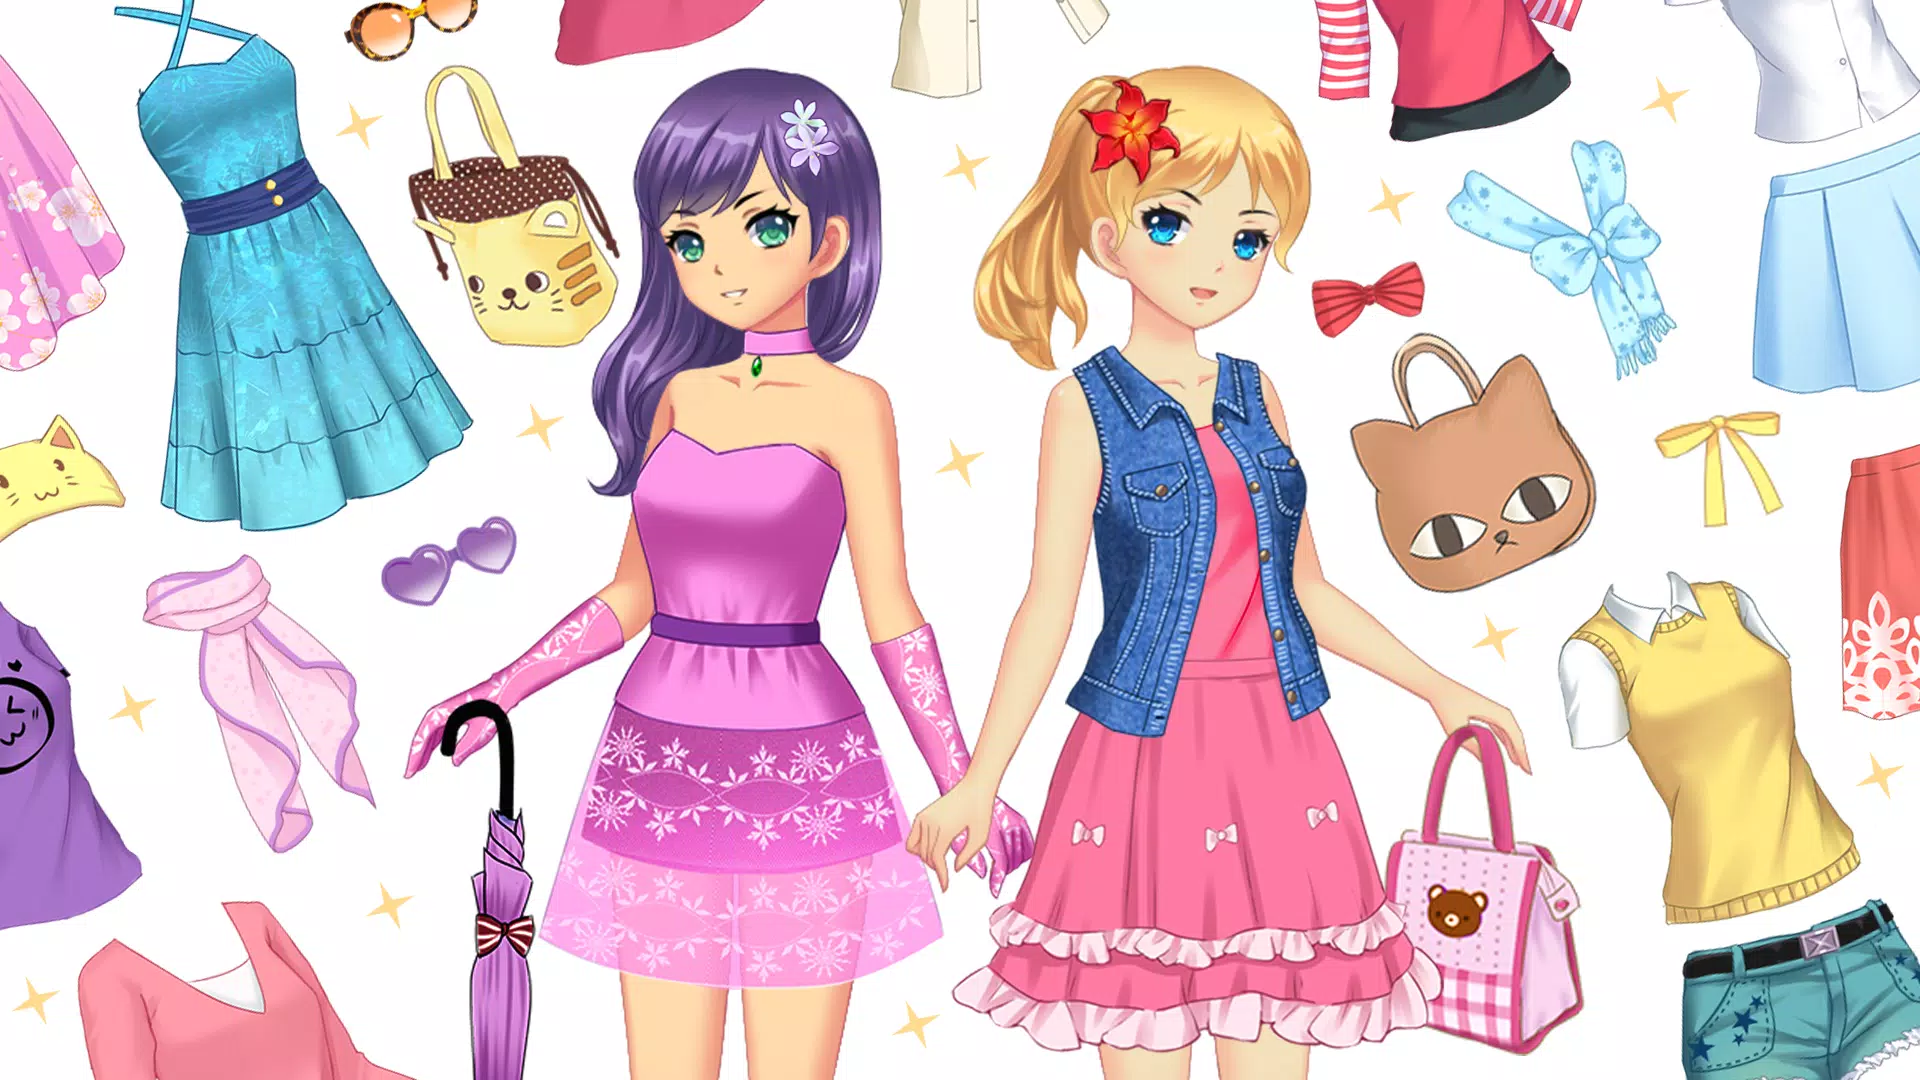 Anime Dress Up Game Mod apk download - Anime Dress Up Game MOD apk 1.0.9  free for Android.